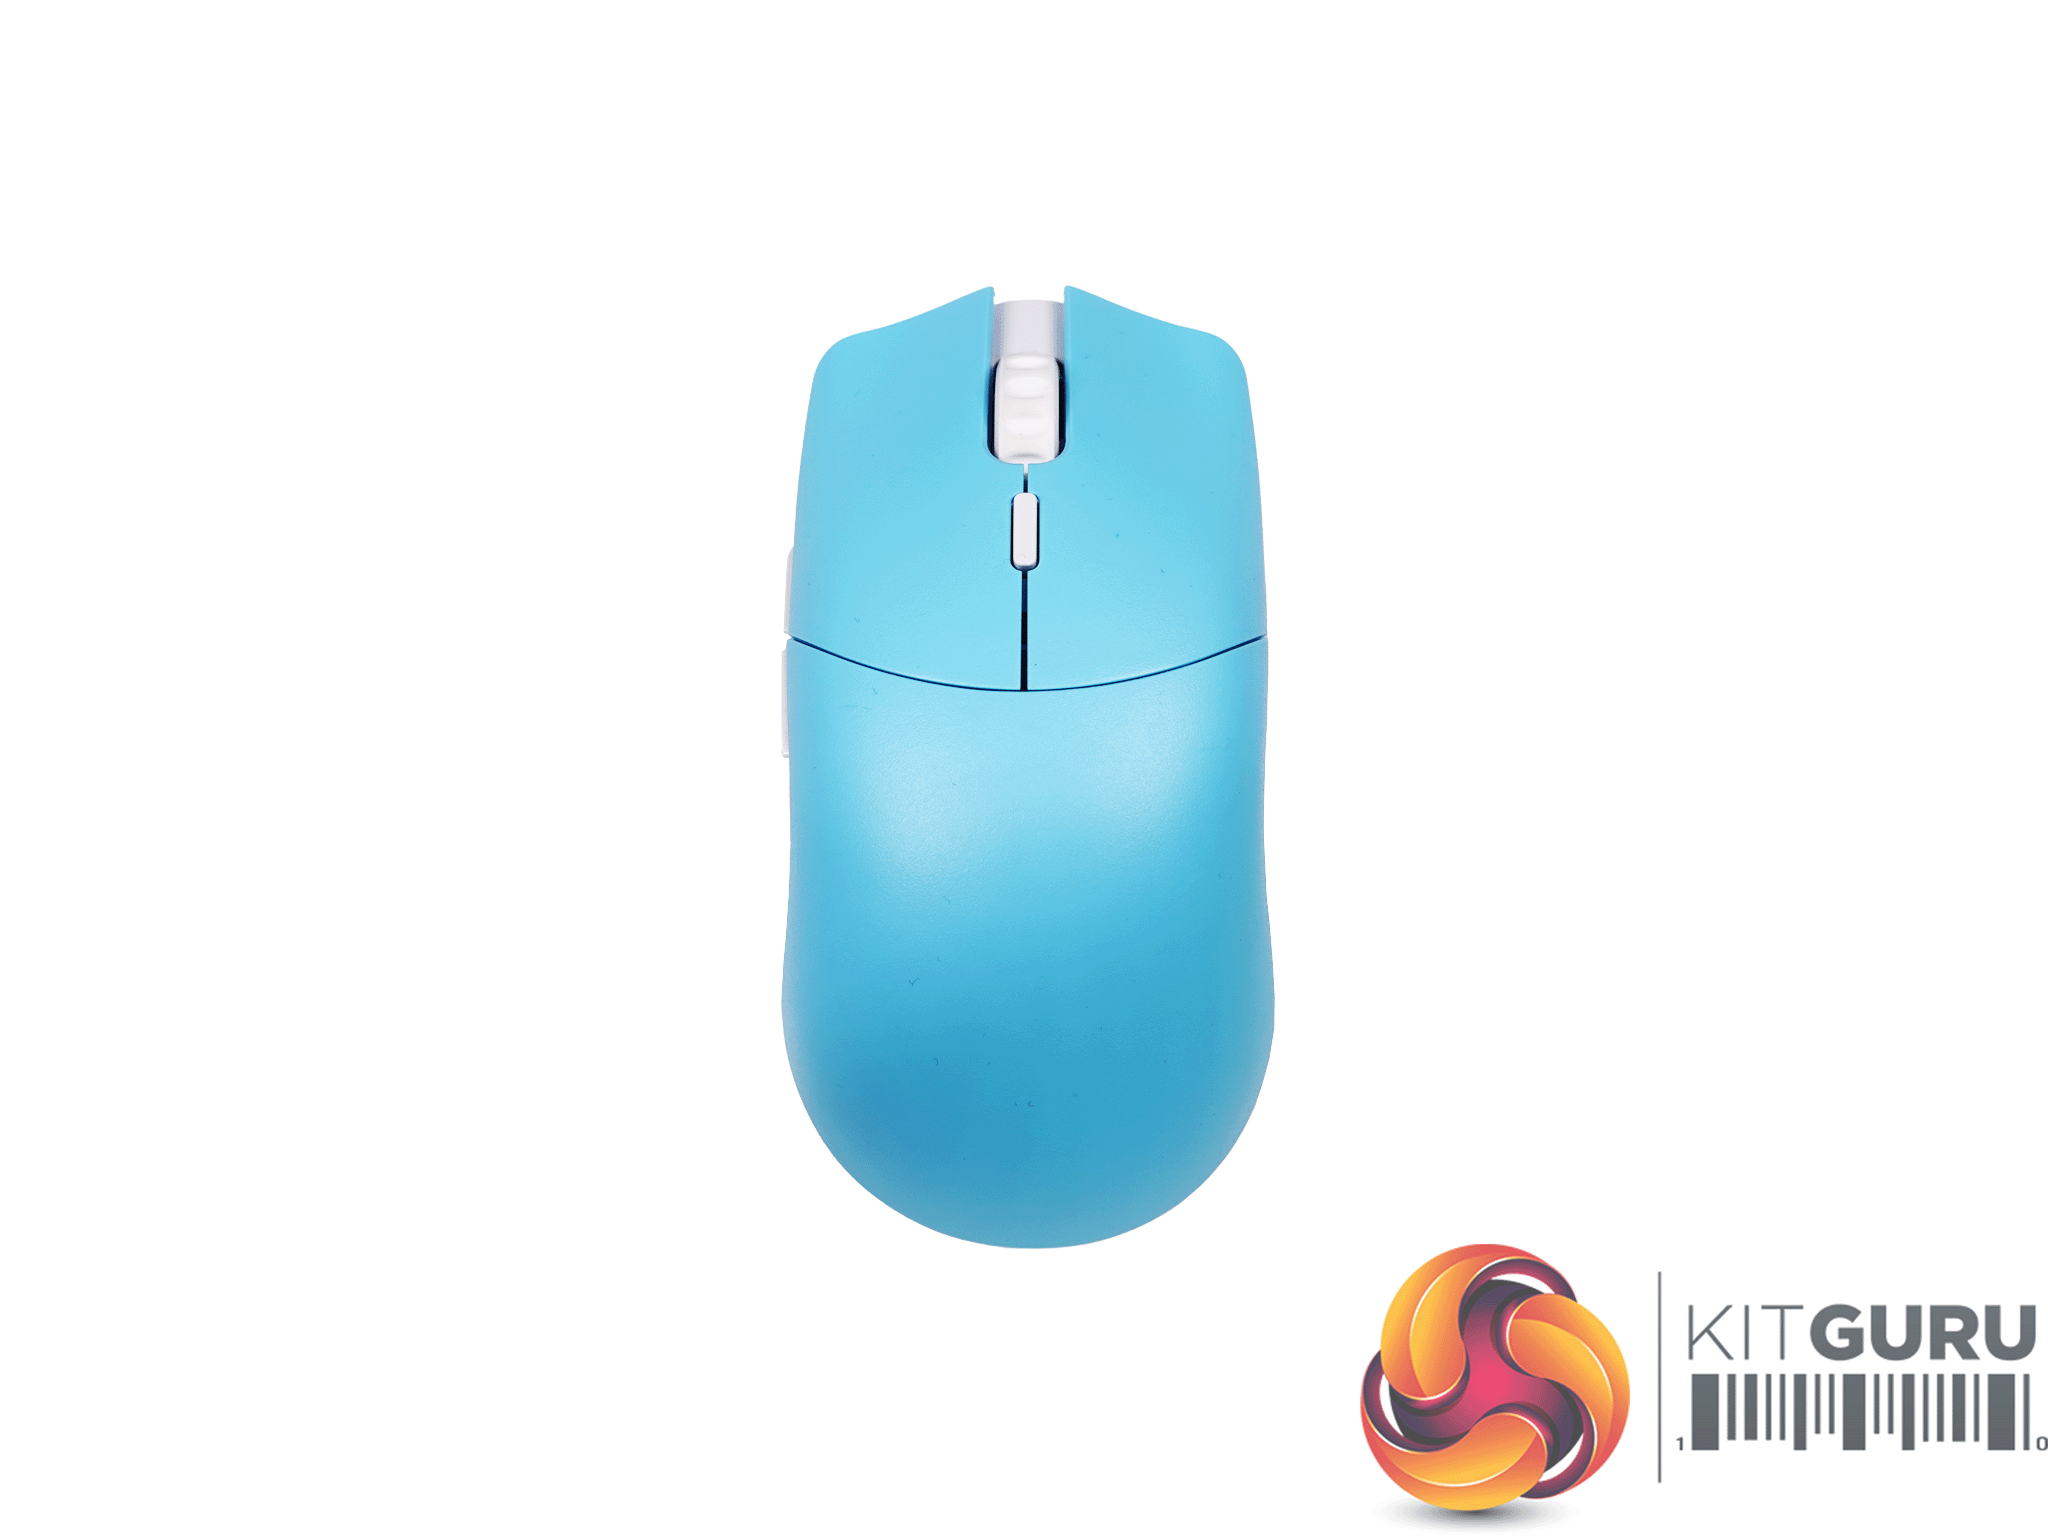 Glorious Model O Pro Wireless Mouse Review